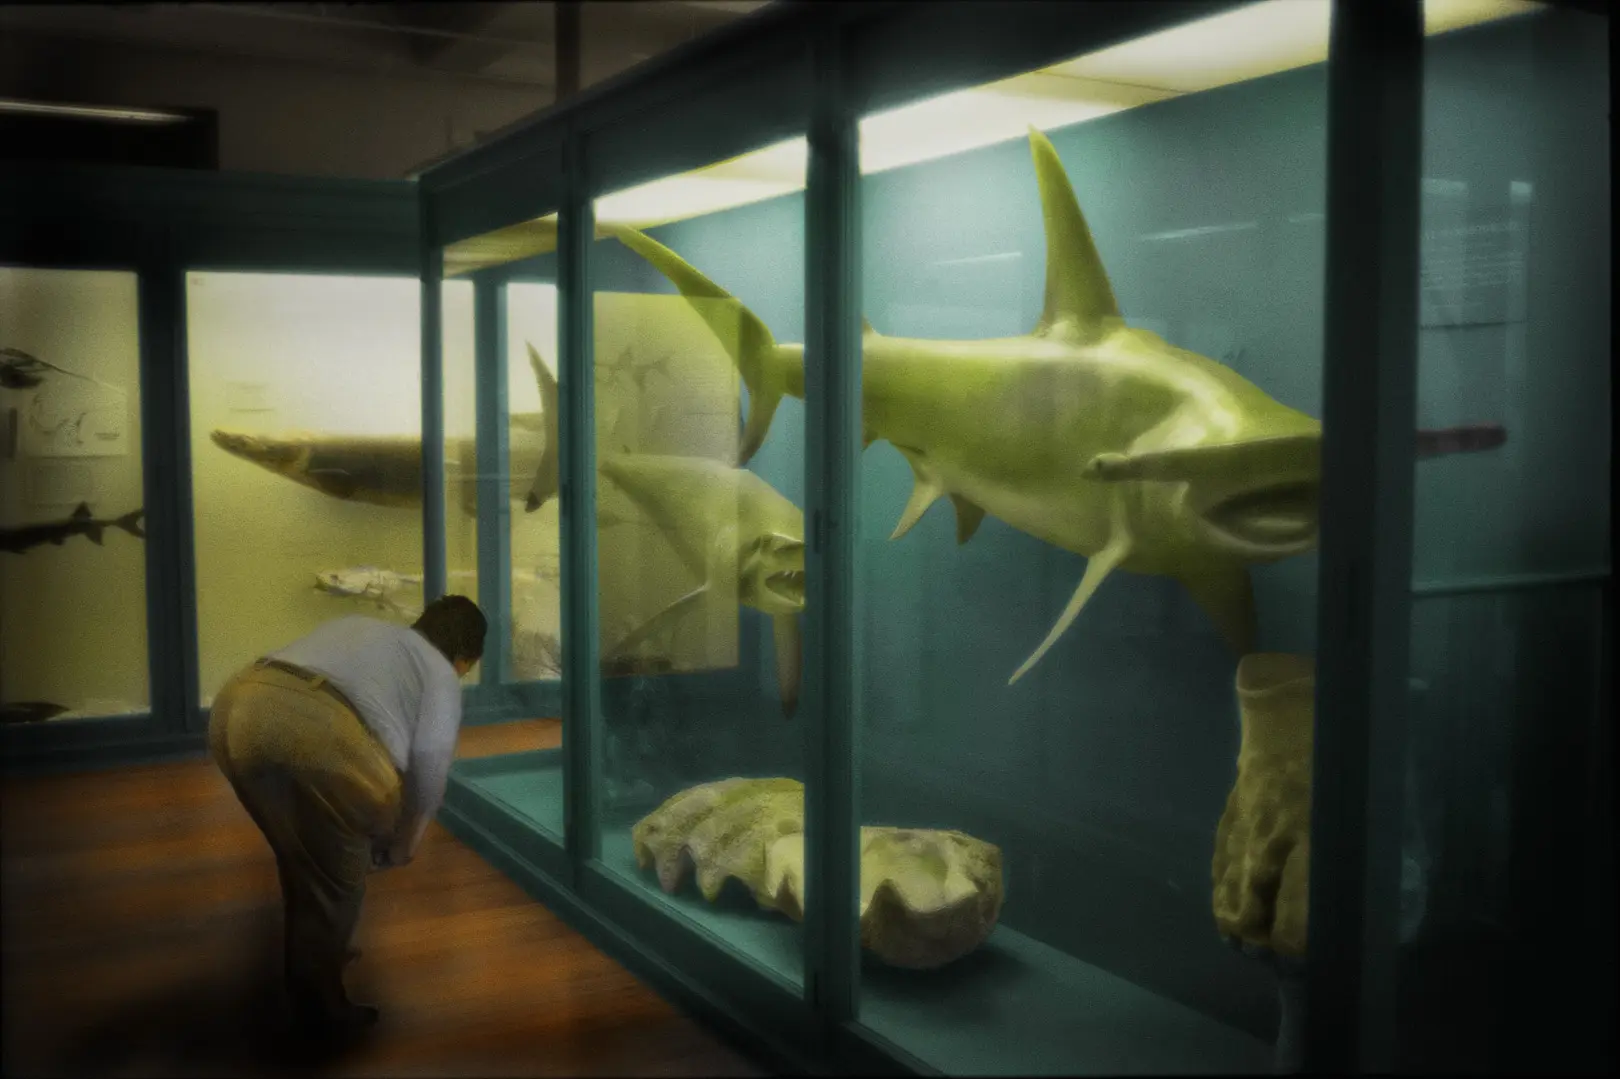 A man looking at two sharks in an aquarium.